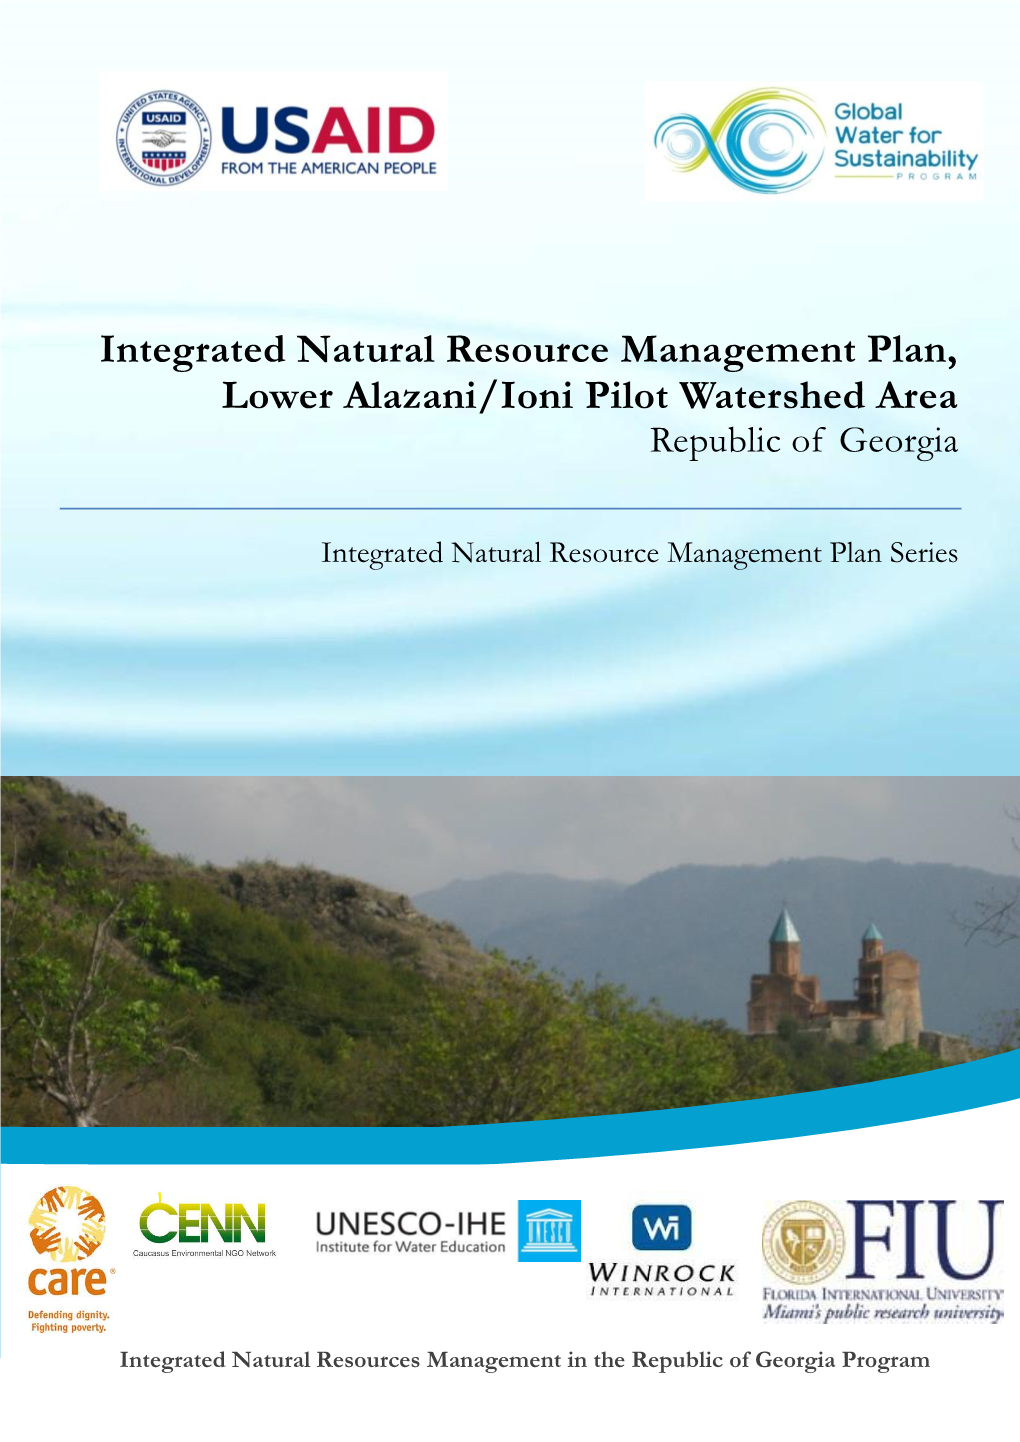 Integrated Natural Resources Management Plan for Lower